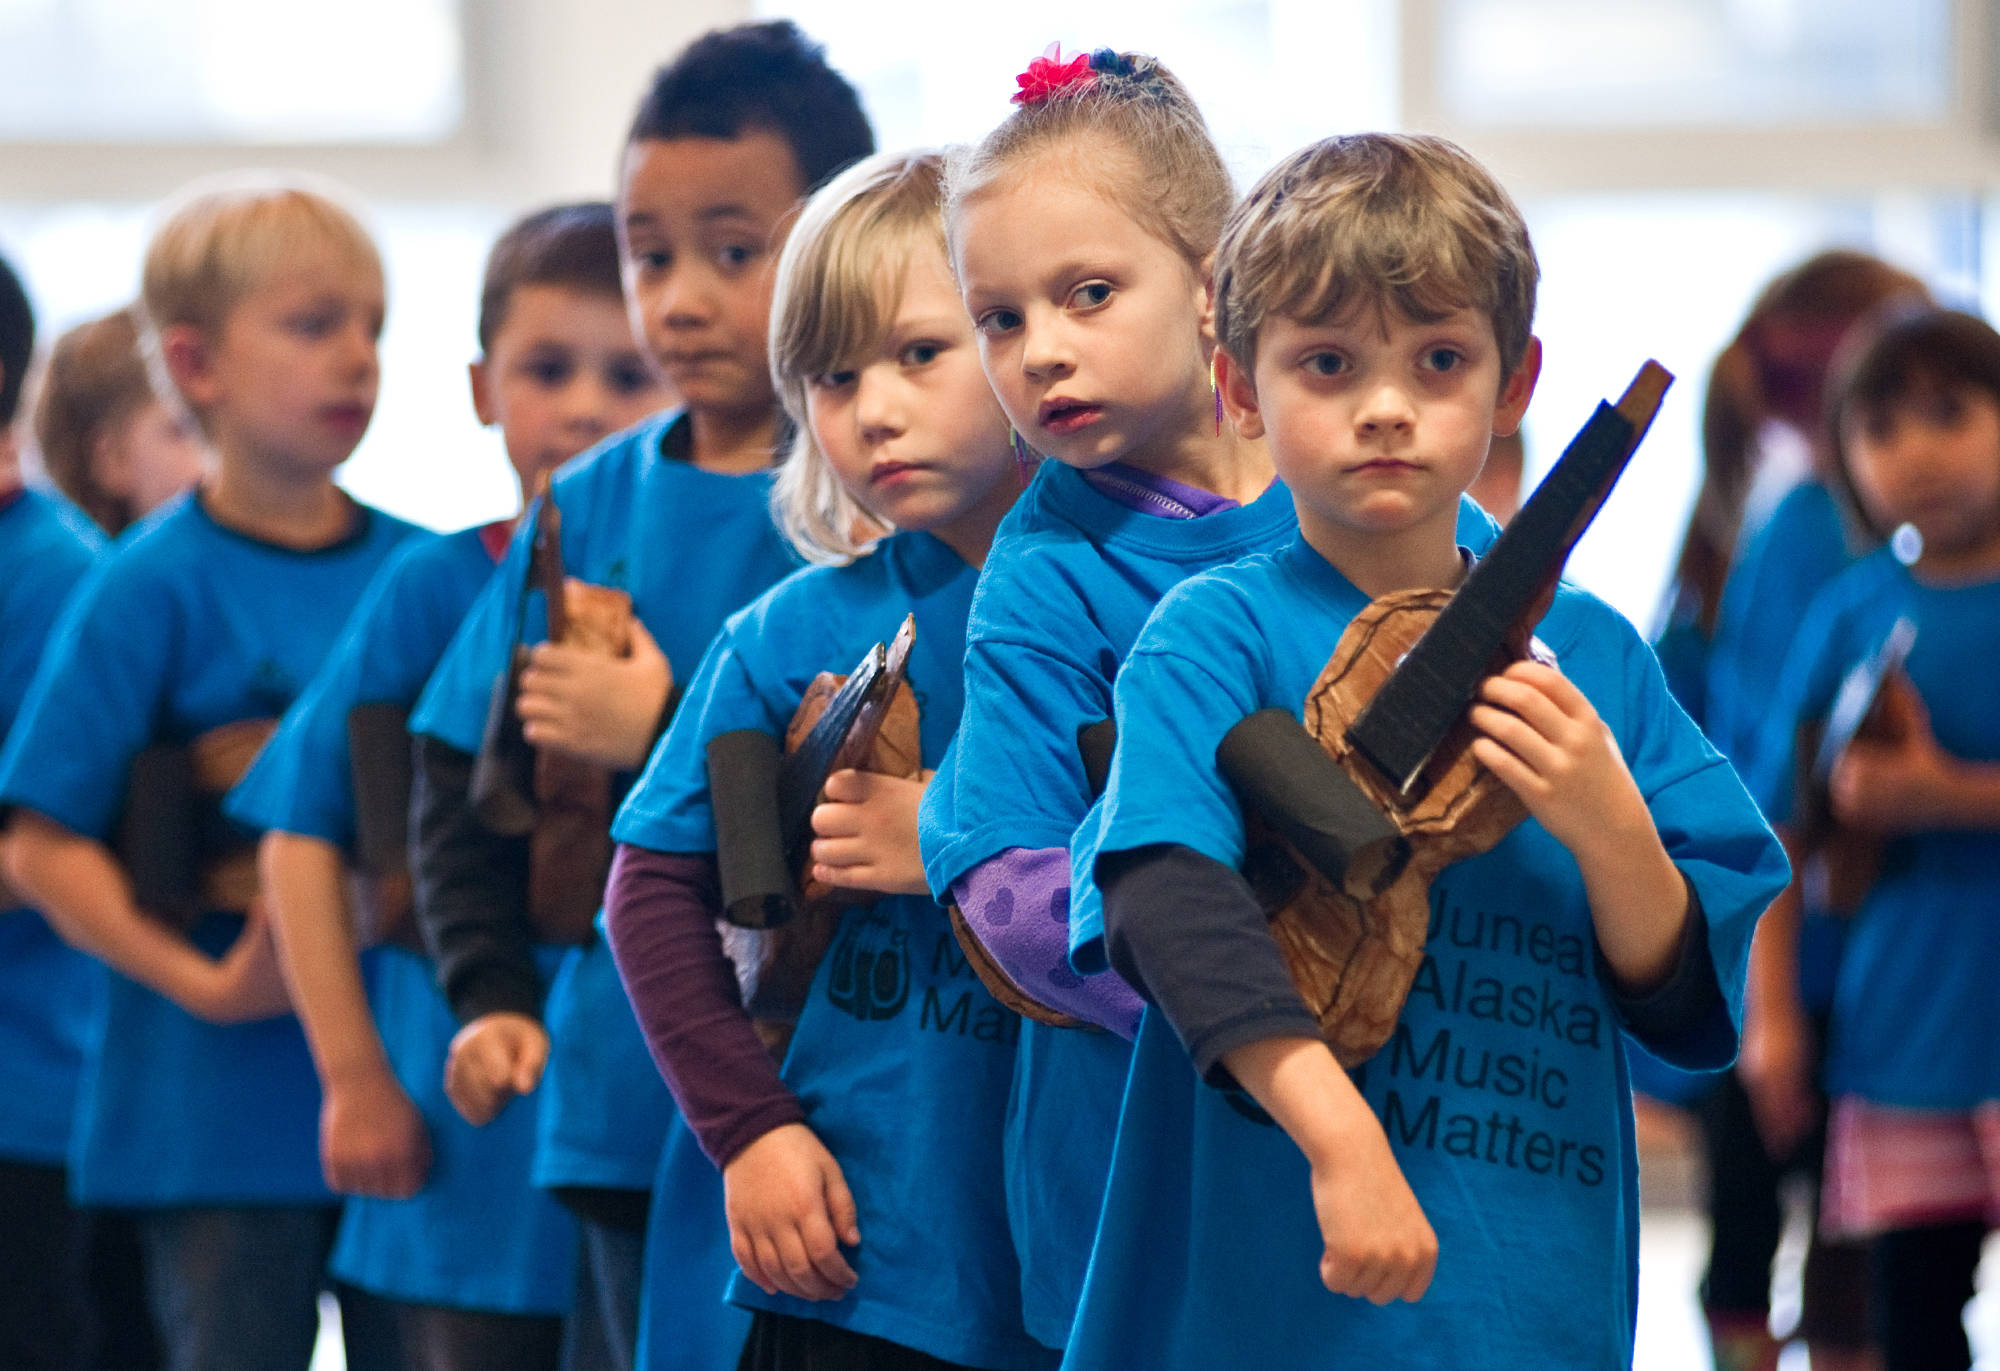 In this November 2013 photo, kindergartners give looks of anticipation before their first Kindergarten Paper Violin Concert at Glacier Valley Elementery School Wednesday. The concert showcased the efforts of Juneau, Alaska Music Matters, which recently was awarded a $10,000 grant. (Michael Penn | Juneau Empire File)